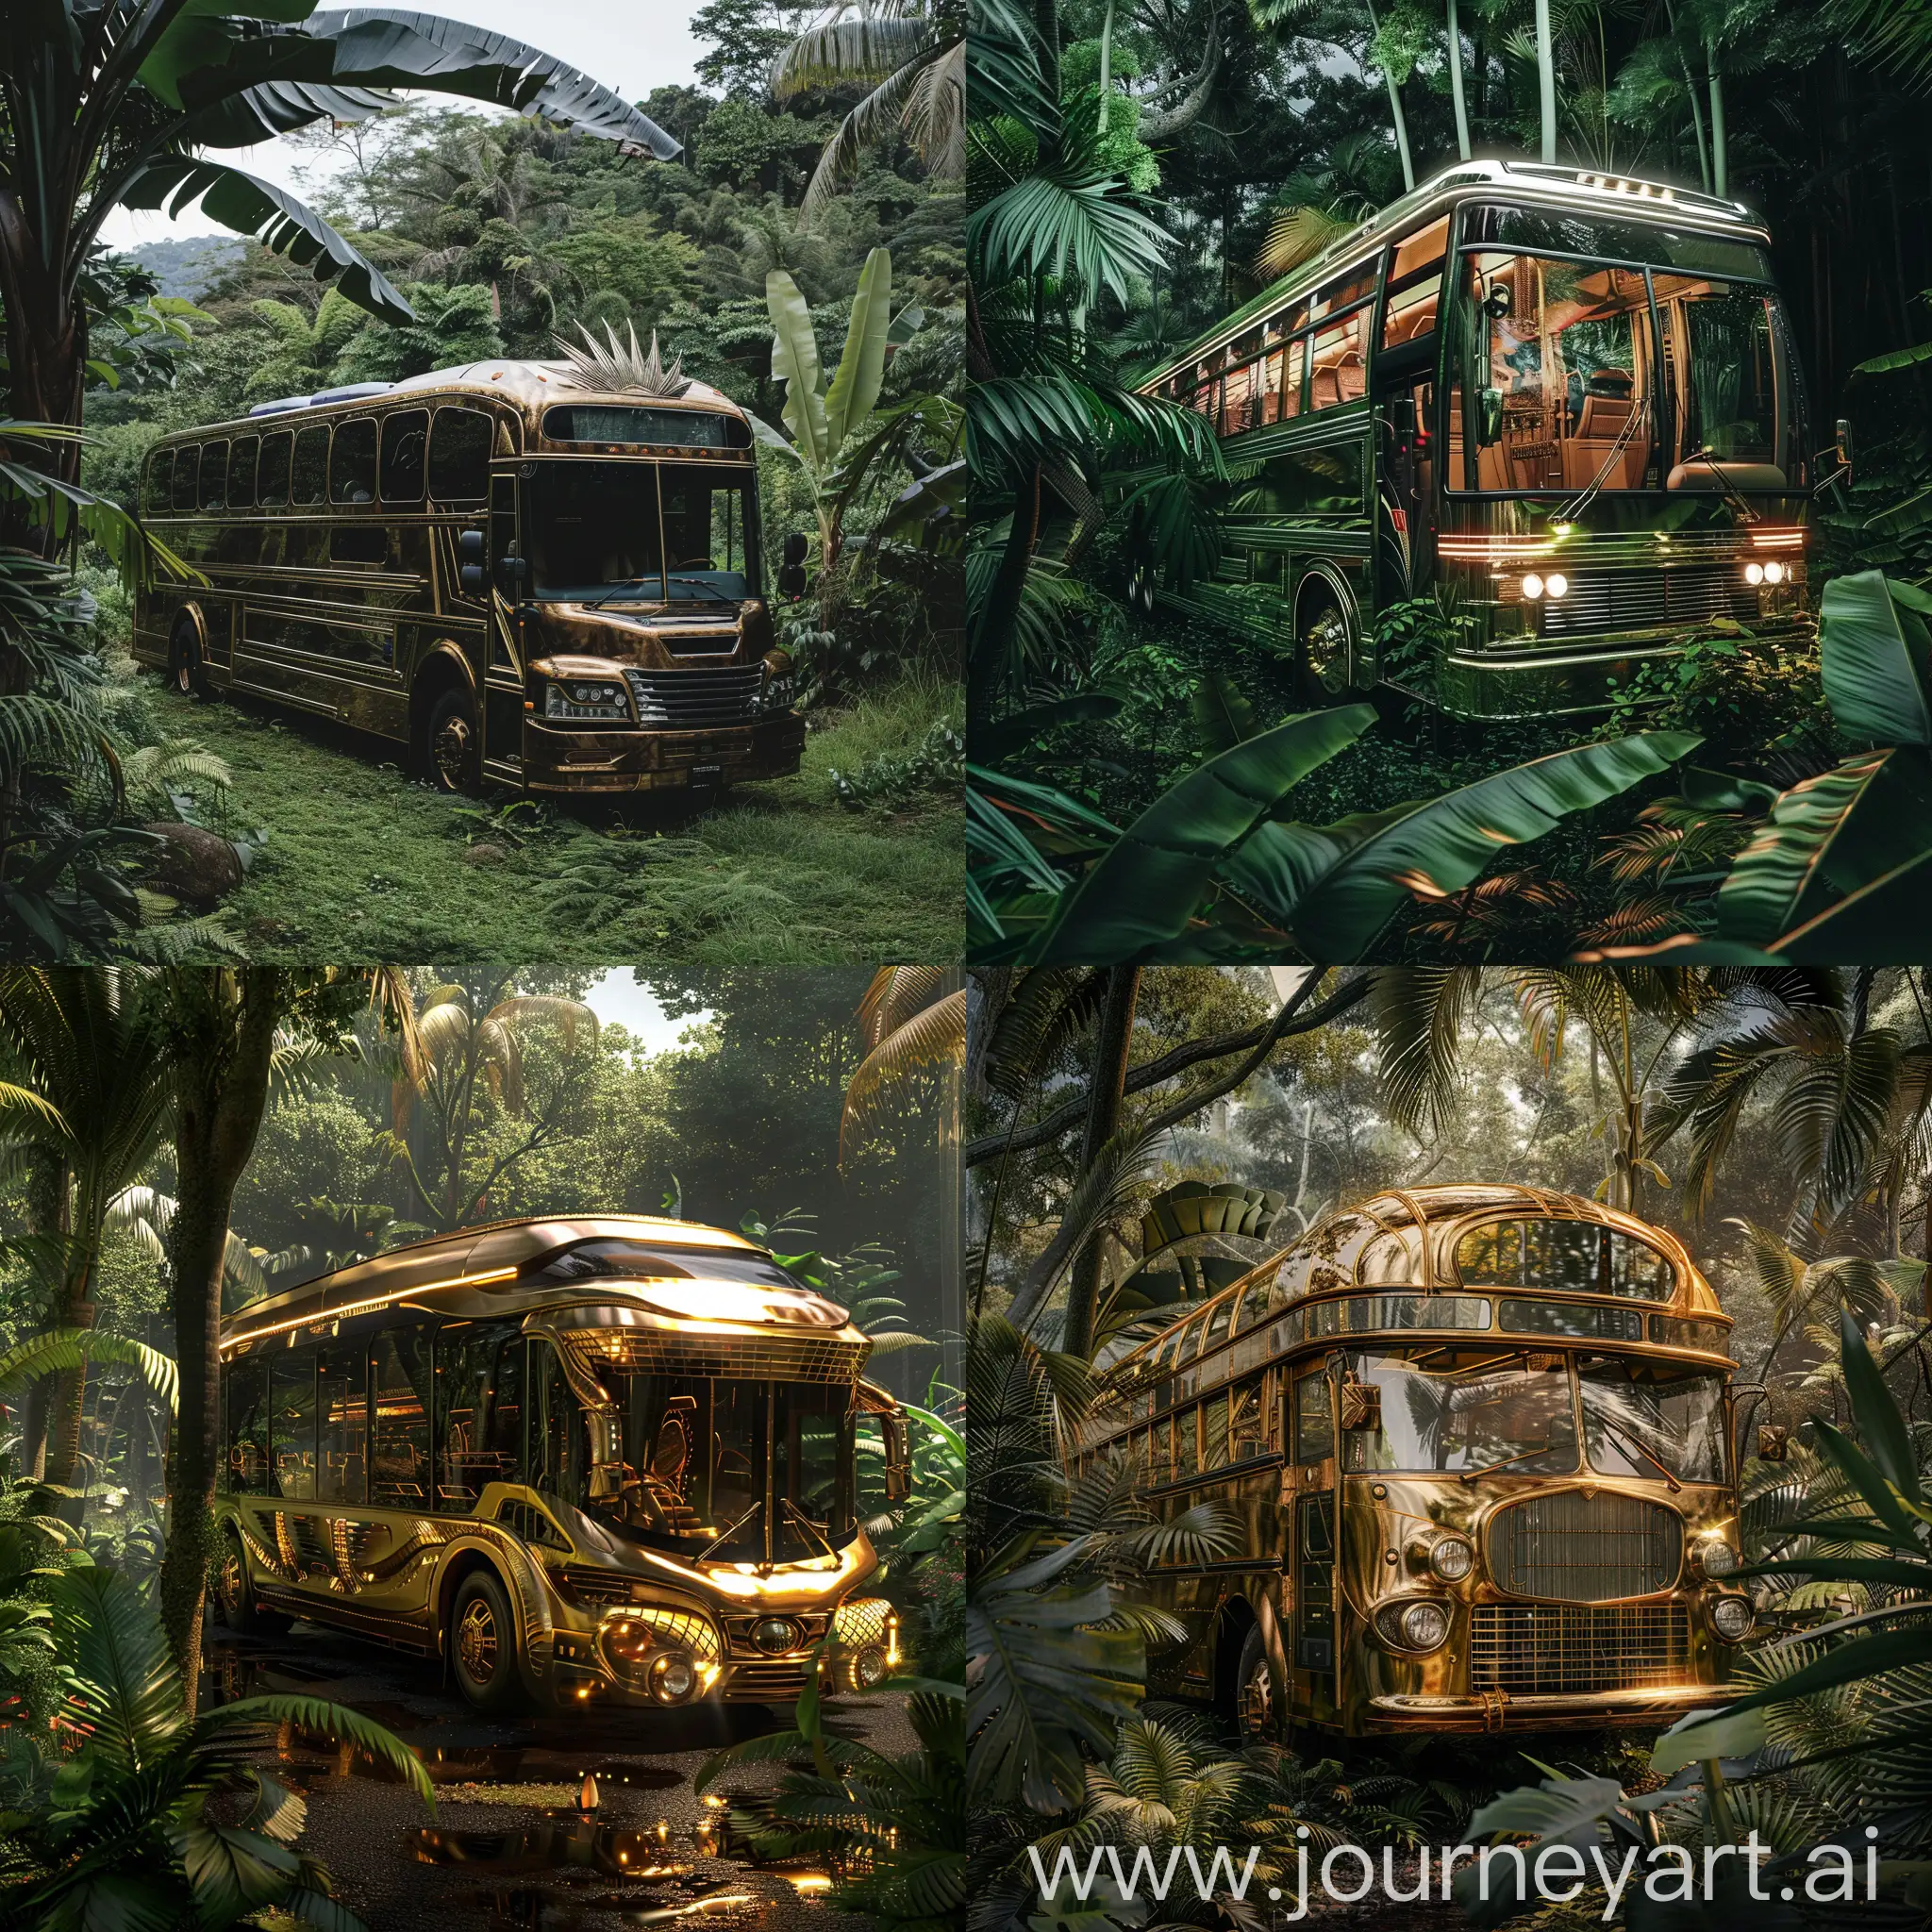 A luxurious bus, in a jungle